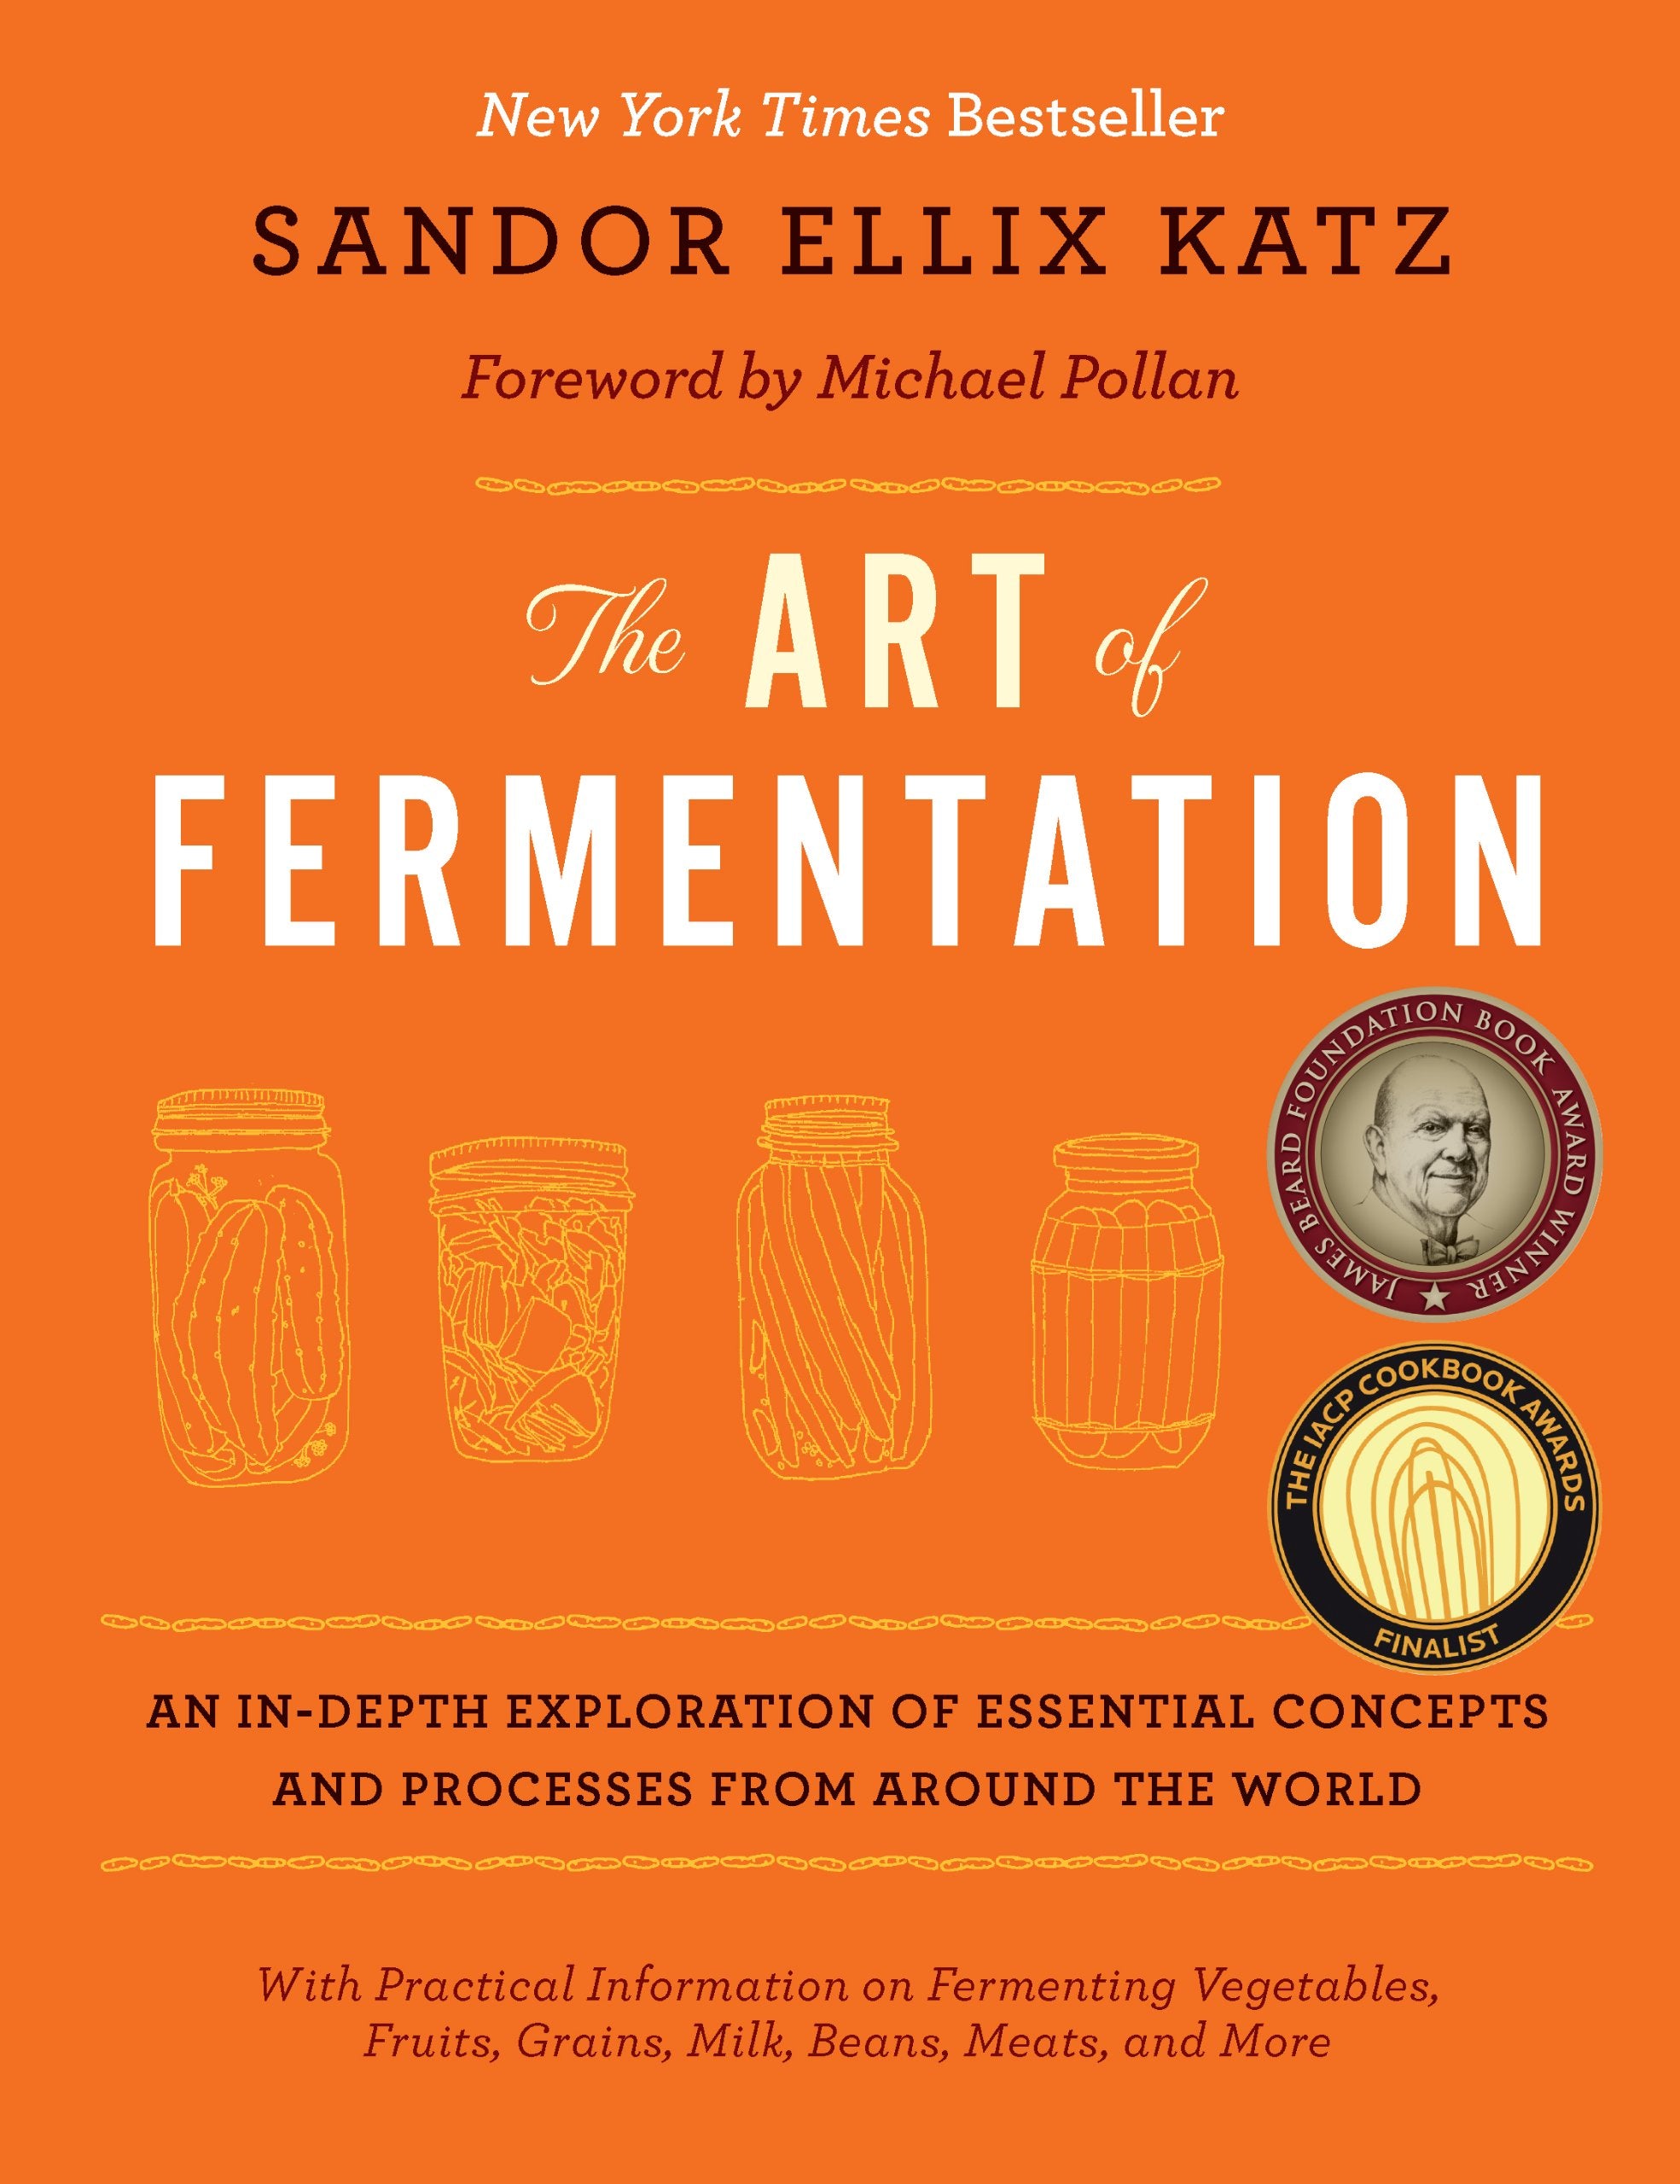 The Art of Fermentation: An In-Depth Exploration of Essential Concepts and Processes from Around the World (Sandor Ellix Katz)